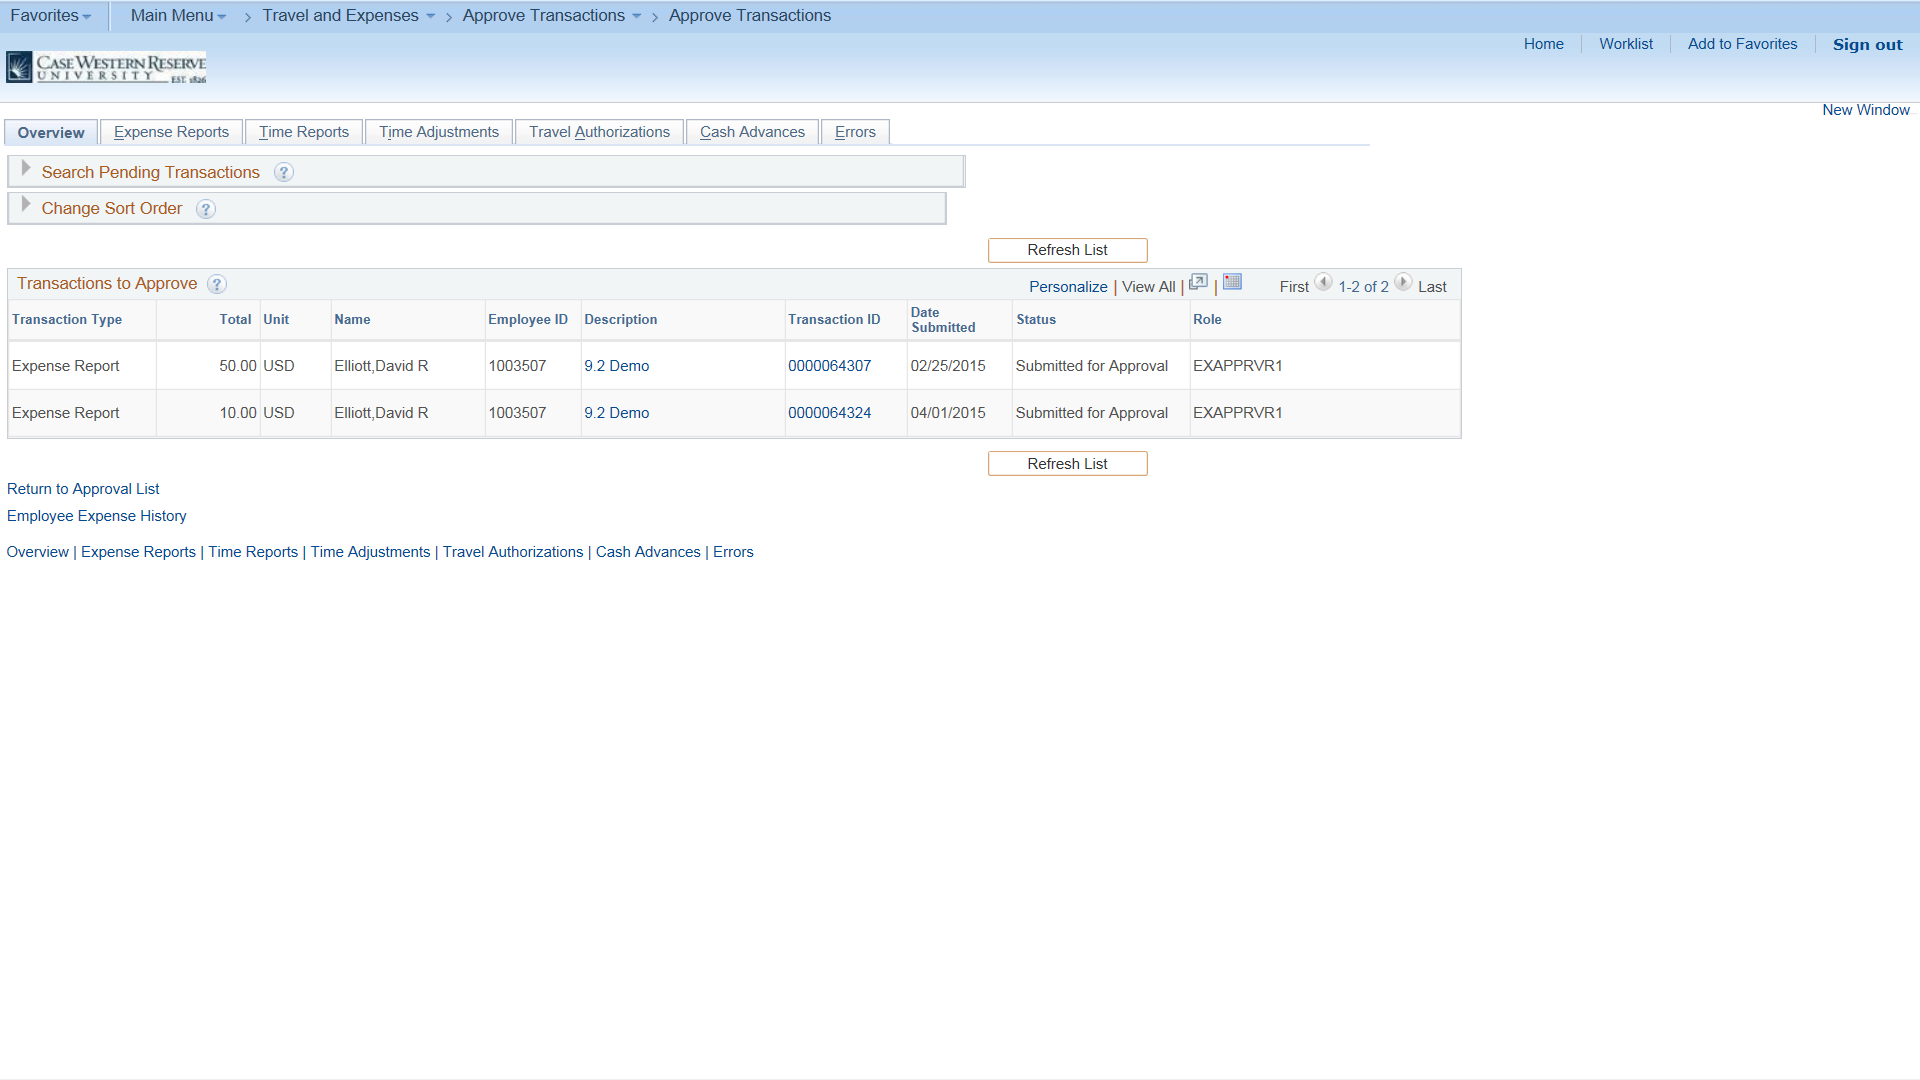 Screenshot of "Approve Transactions" screen with a list of two transactions awaiting approval